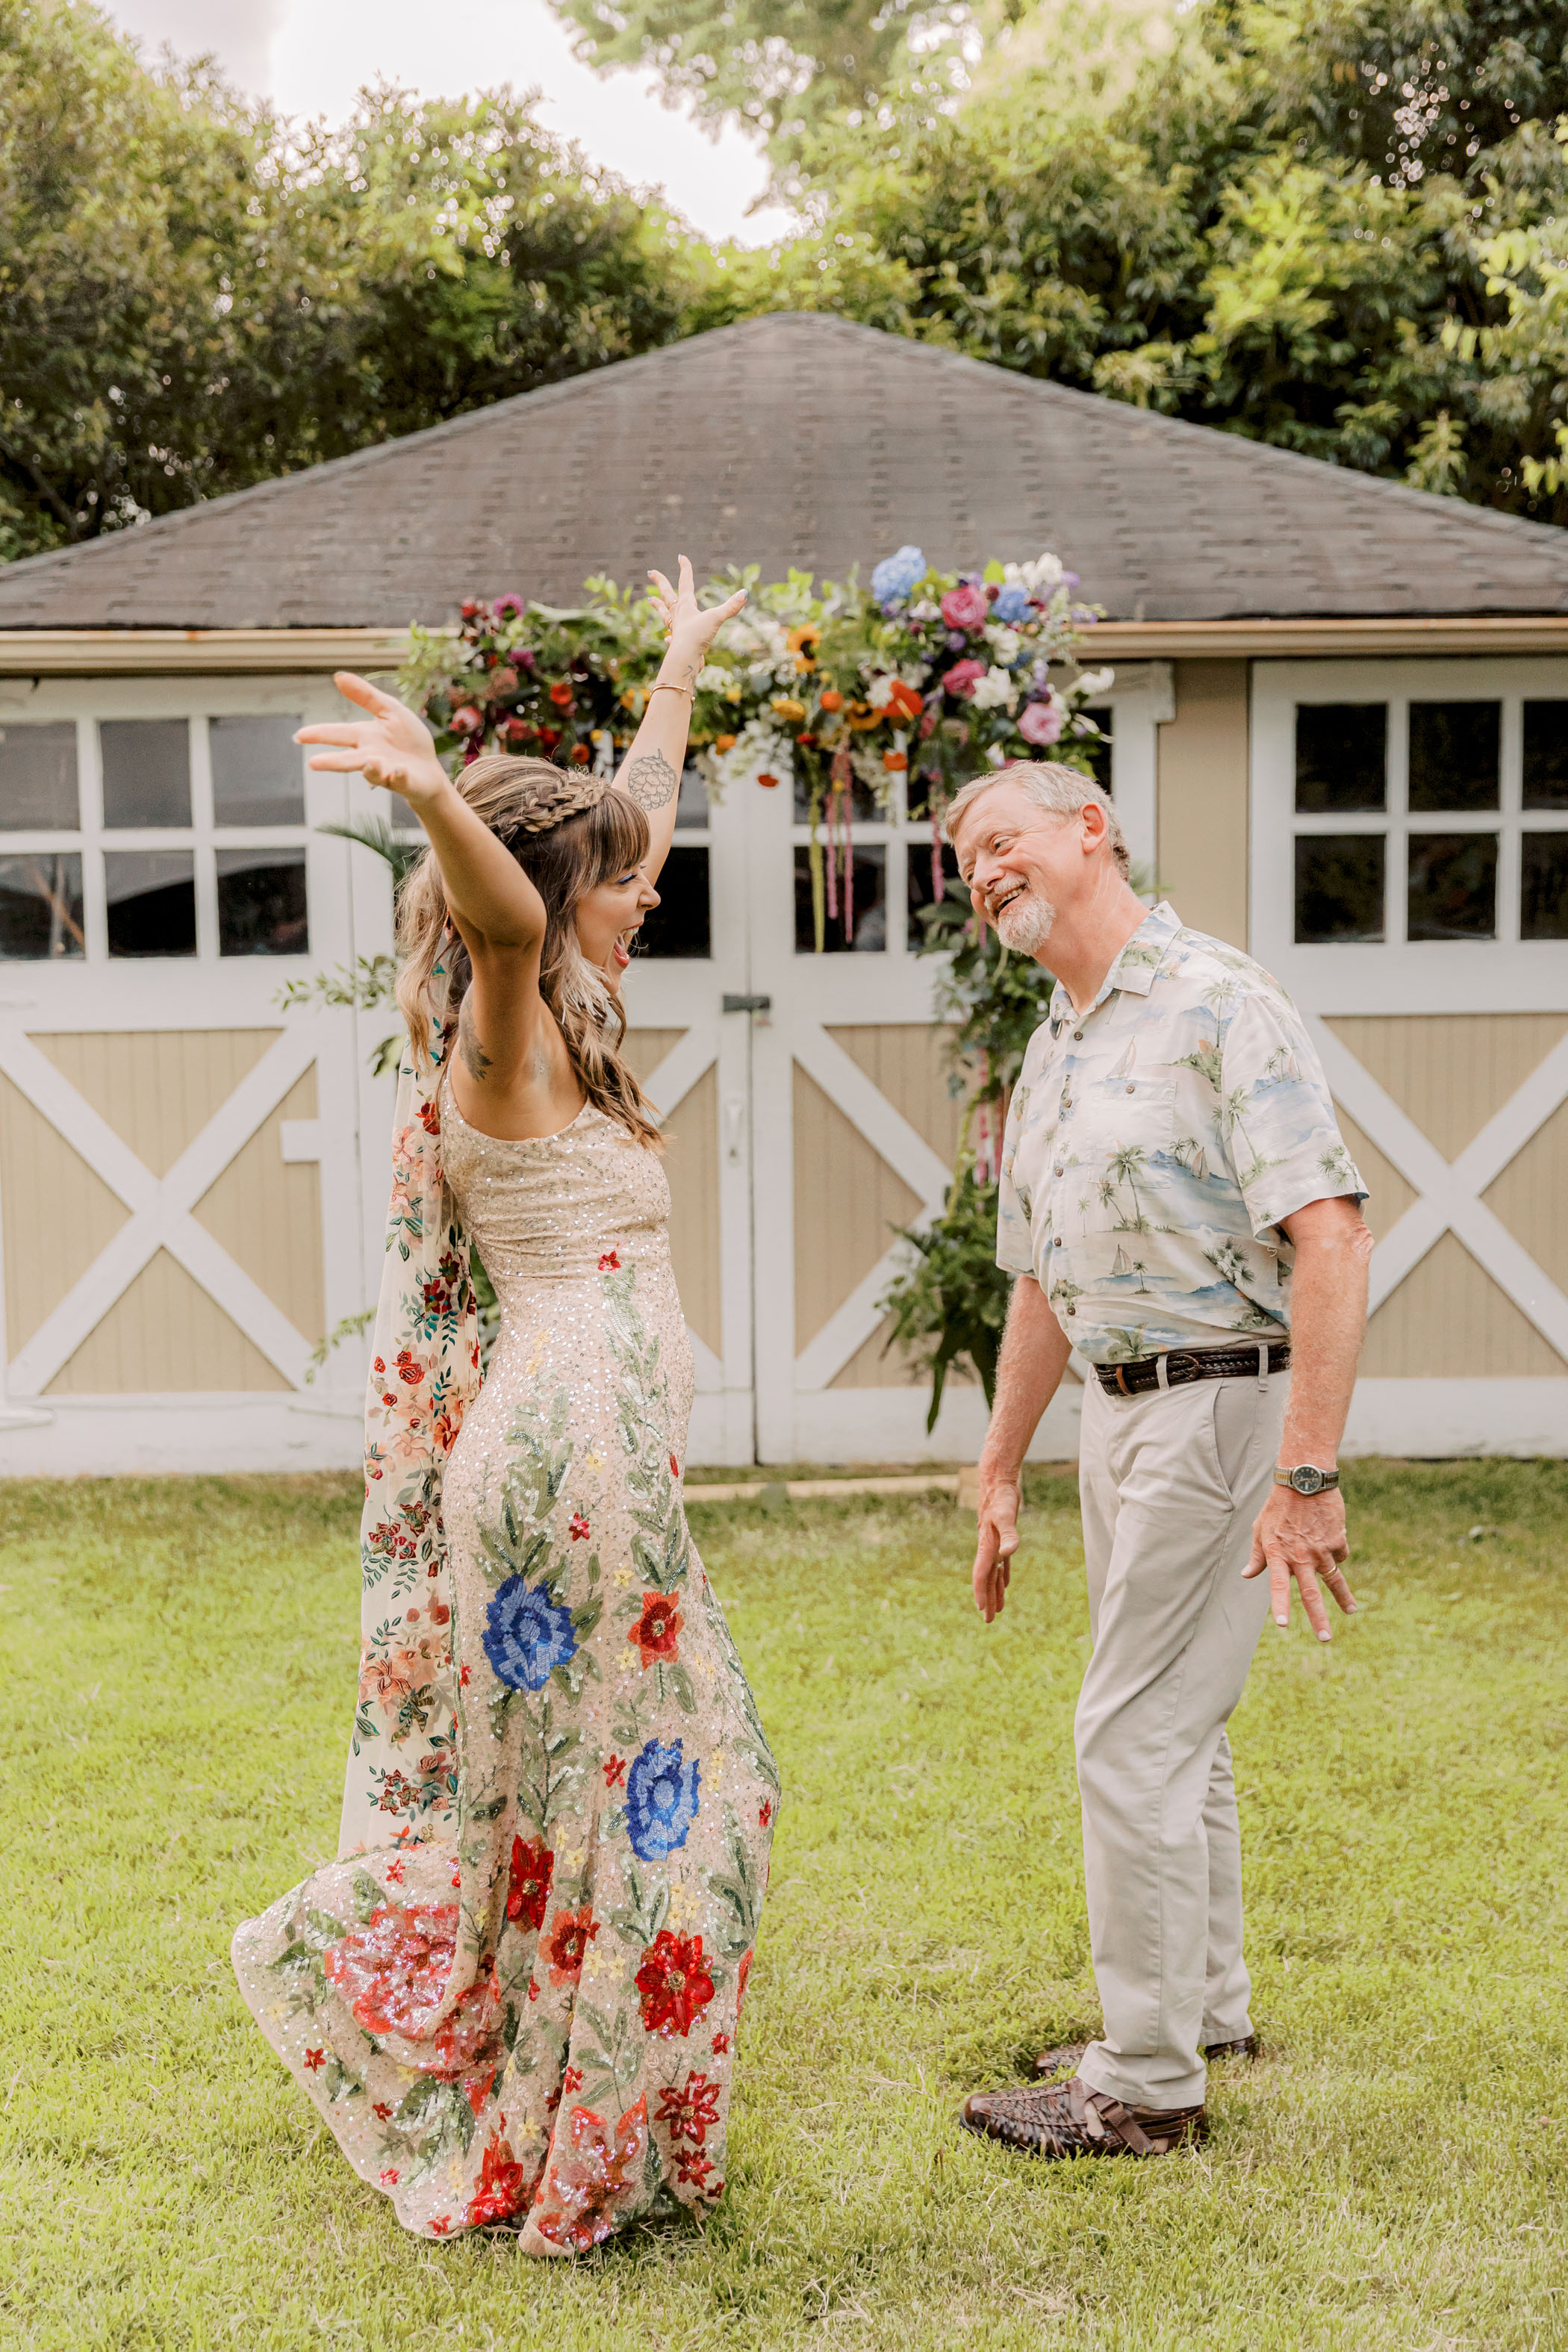 Our Big Fat Rainbow Jewish Wedding First Look with Dad